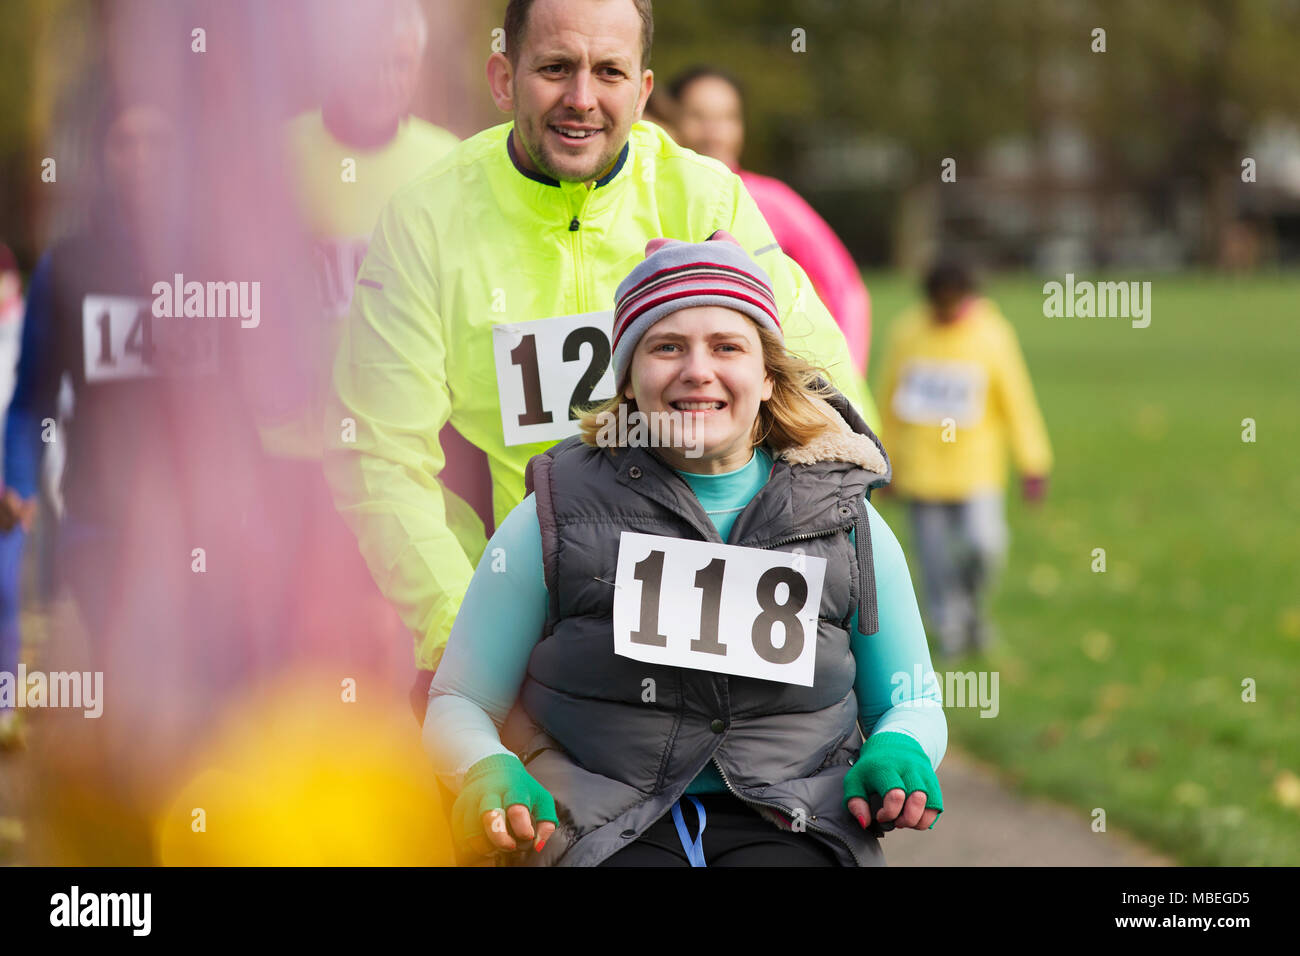 Portrait man pushing smiling woman in wheelchair at charity race in park Stock Photo